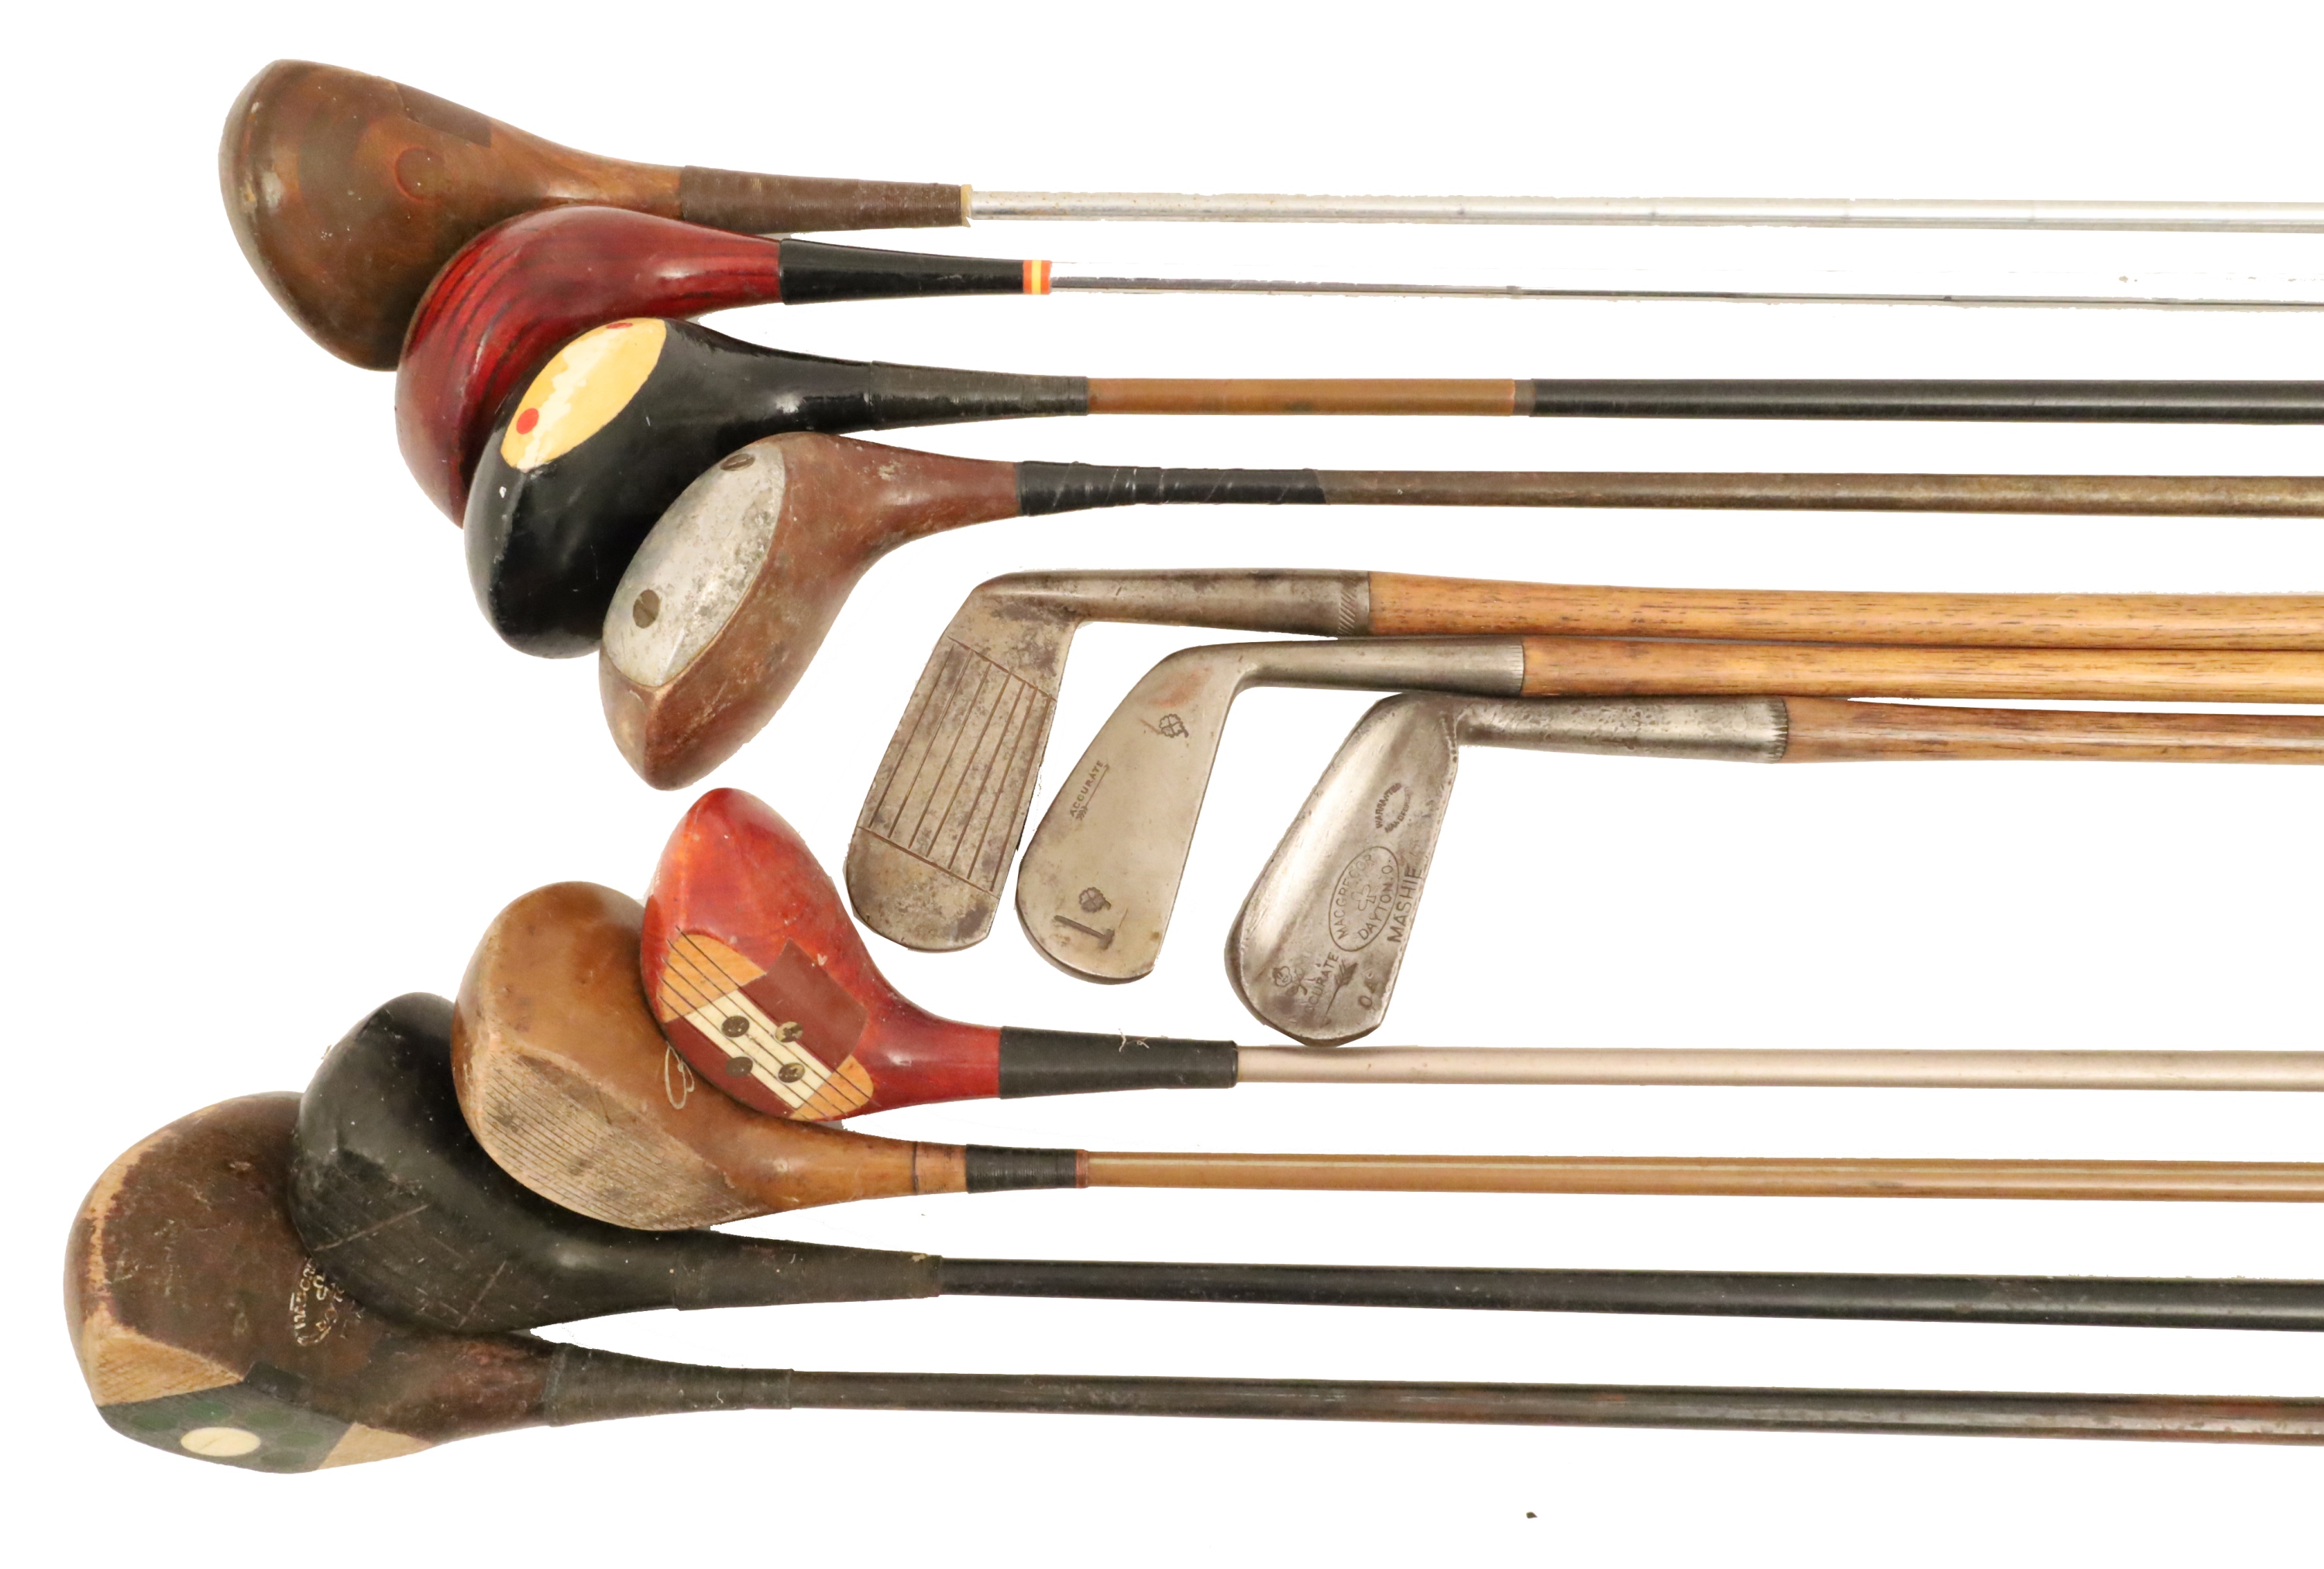 11 ANTIQUE AND VINTAGE GOLF CLUBS 2f8f70